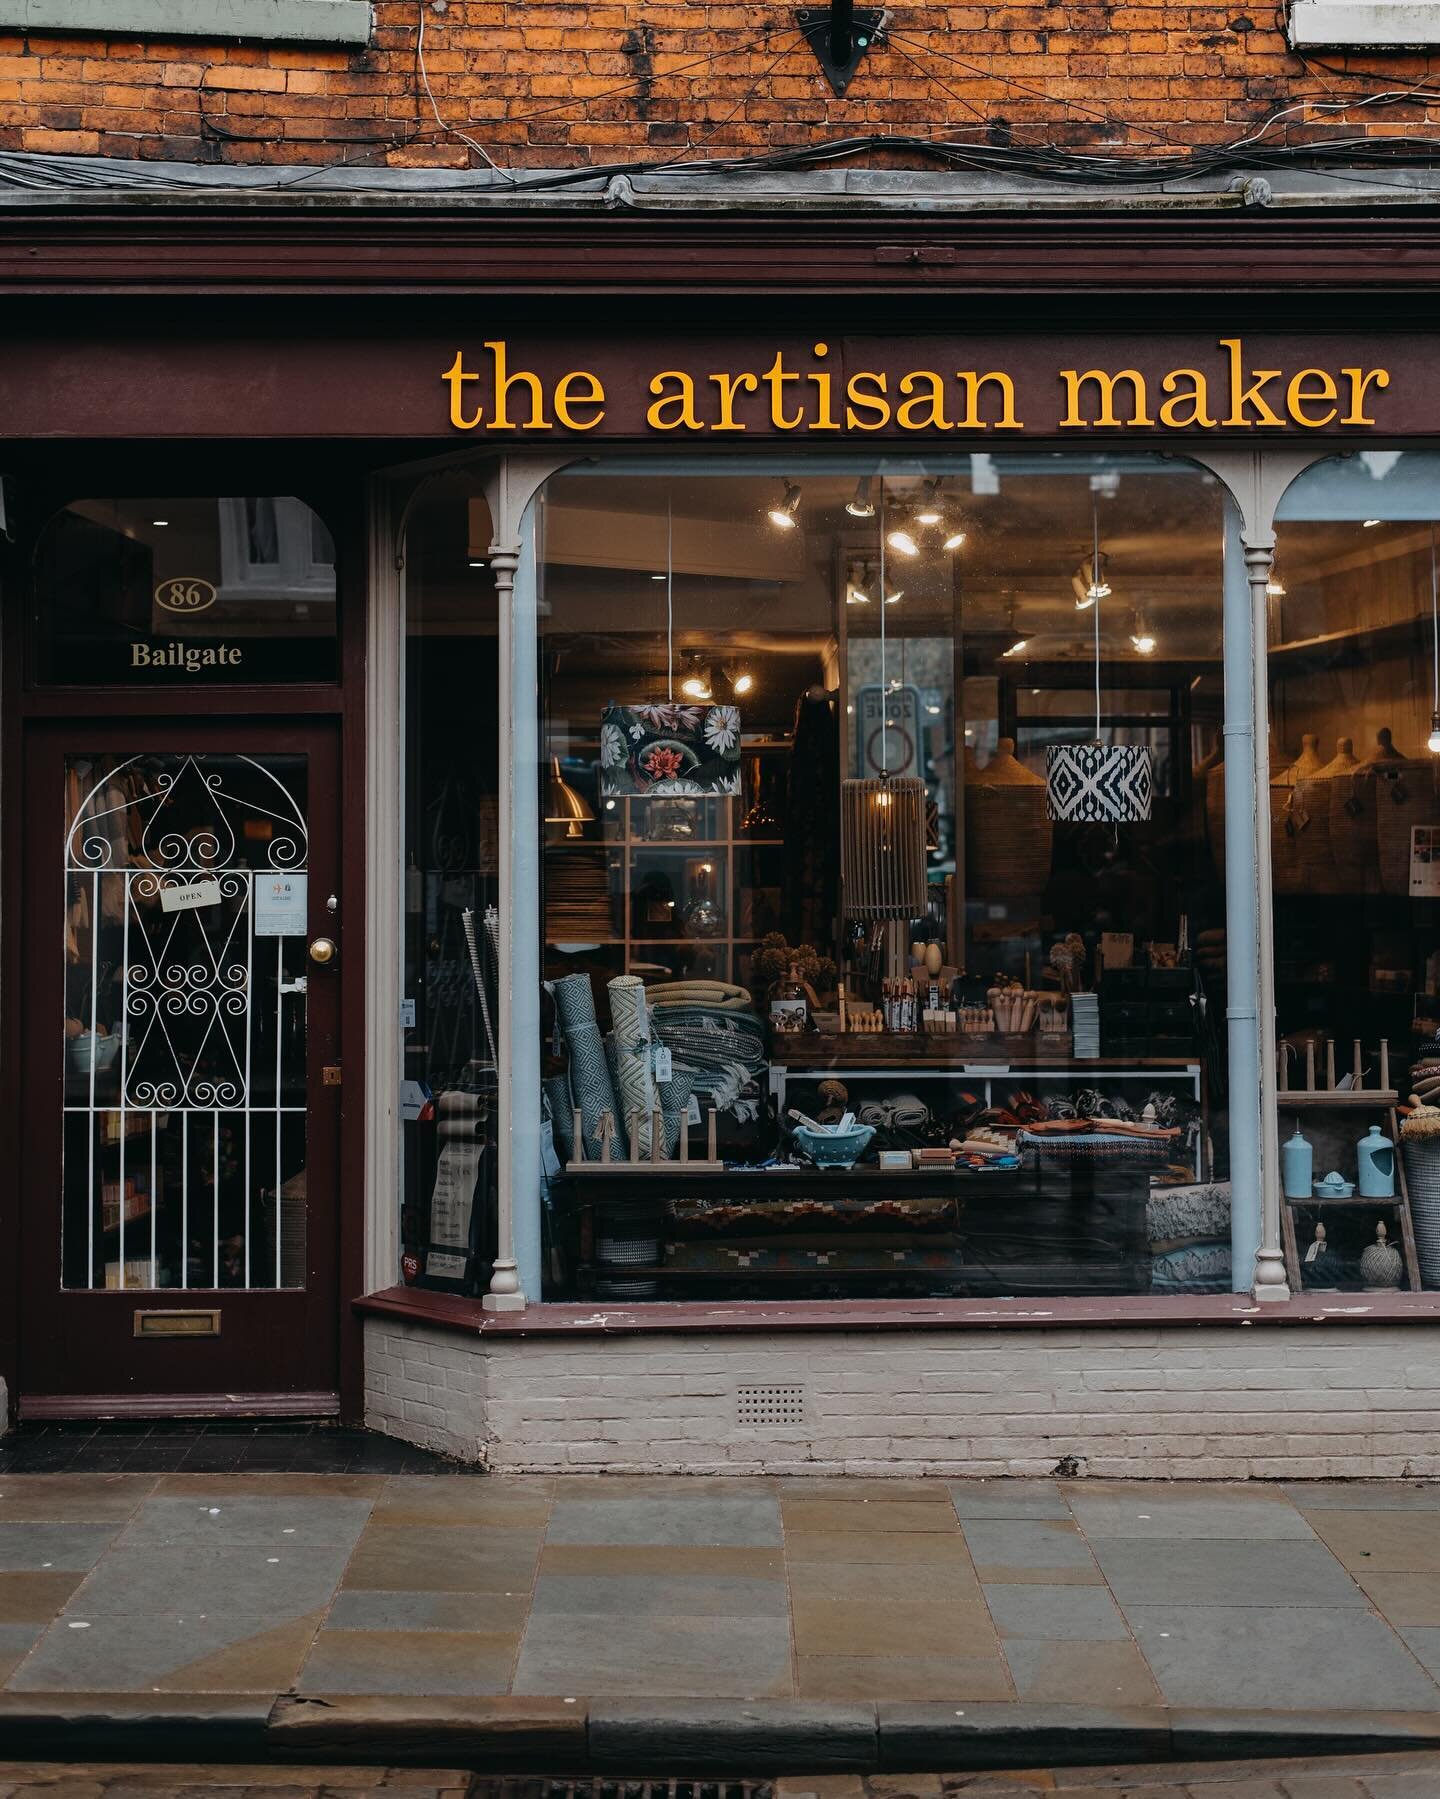 My FAVOURITE shop in Lincoln is The Artisan Maker, situated in Lincoln&rsquo;s historic Bailgate area. It&rsquo;s chock full of texture, layers &amp; colour. 

It&rsquo;s a real treat for the eyes - so I dropped in to capture a few shots. Photographi